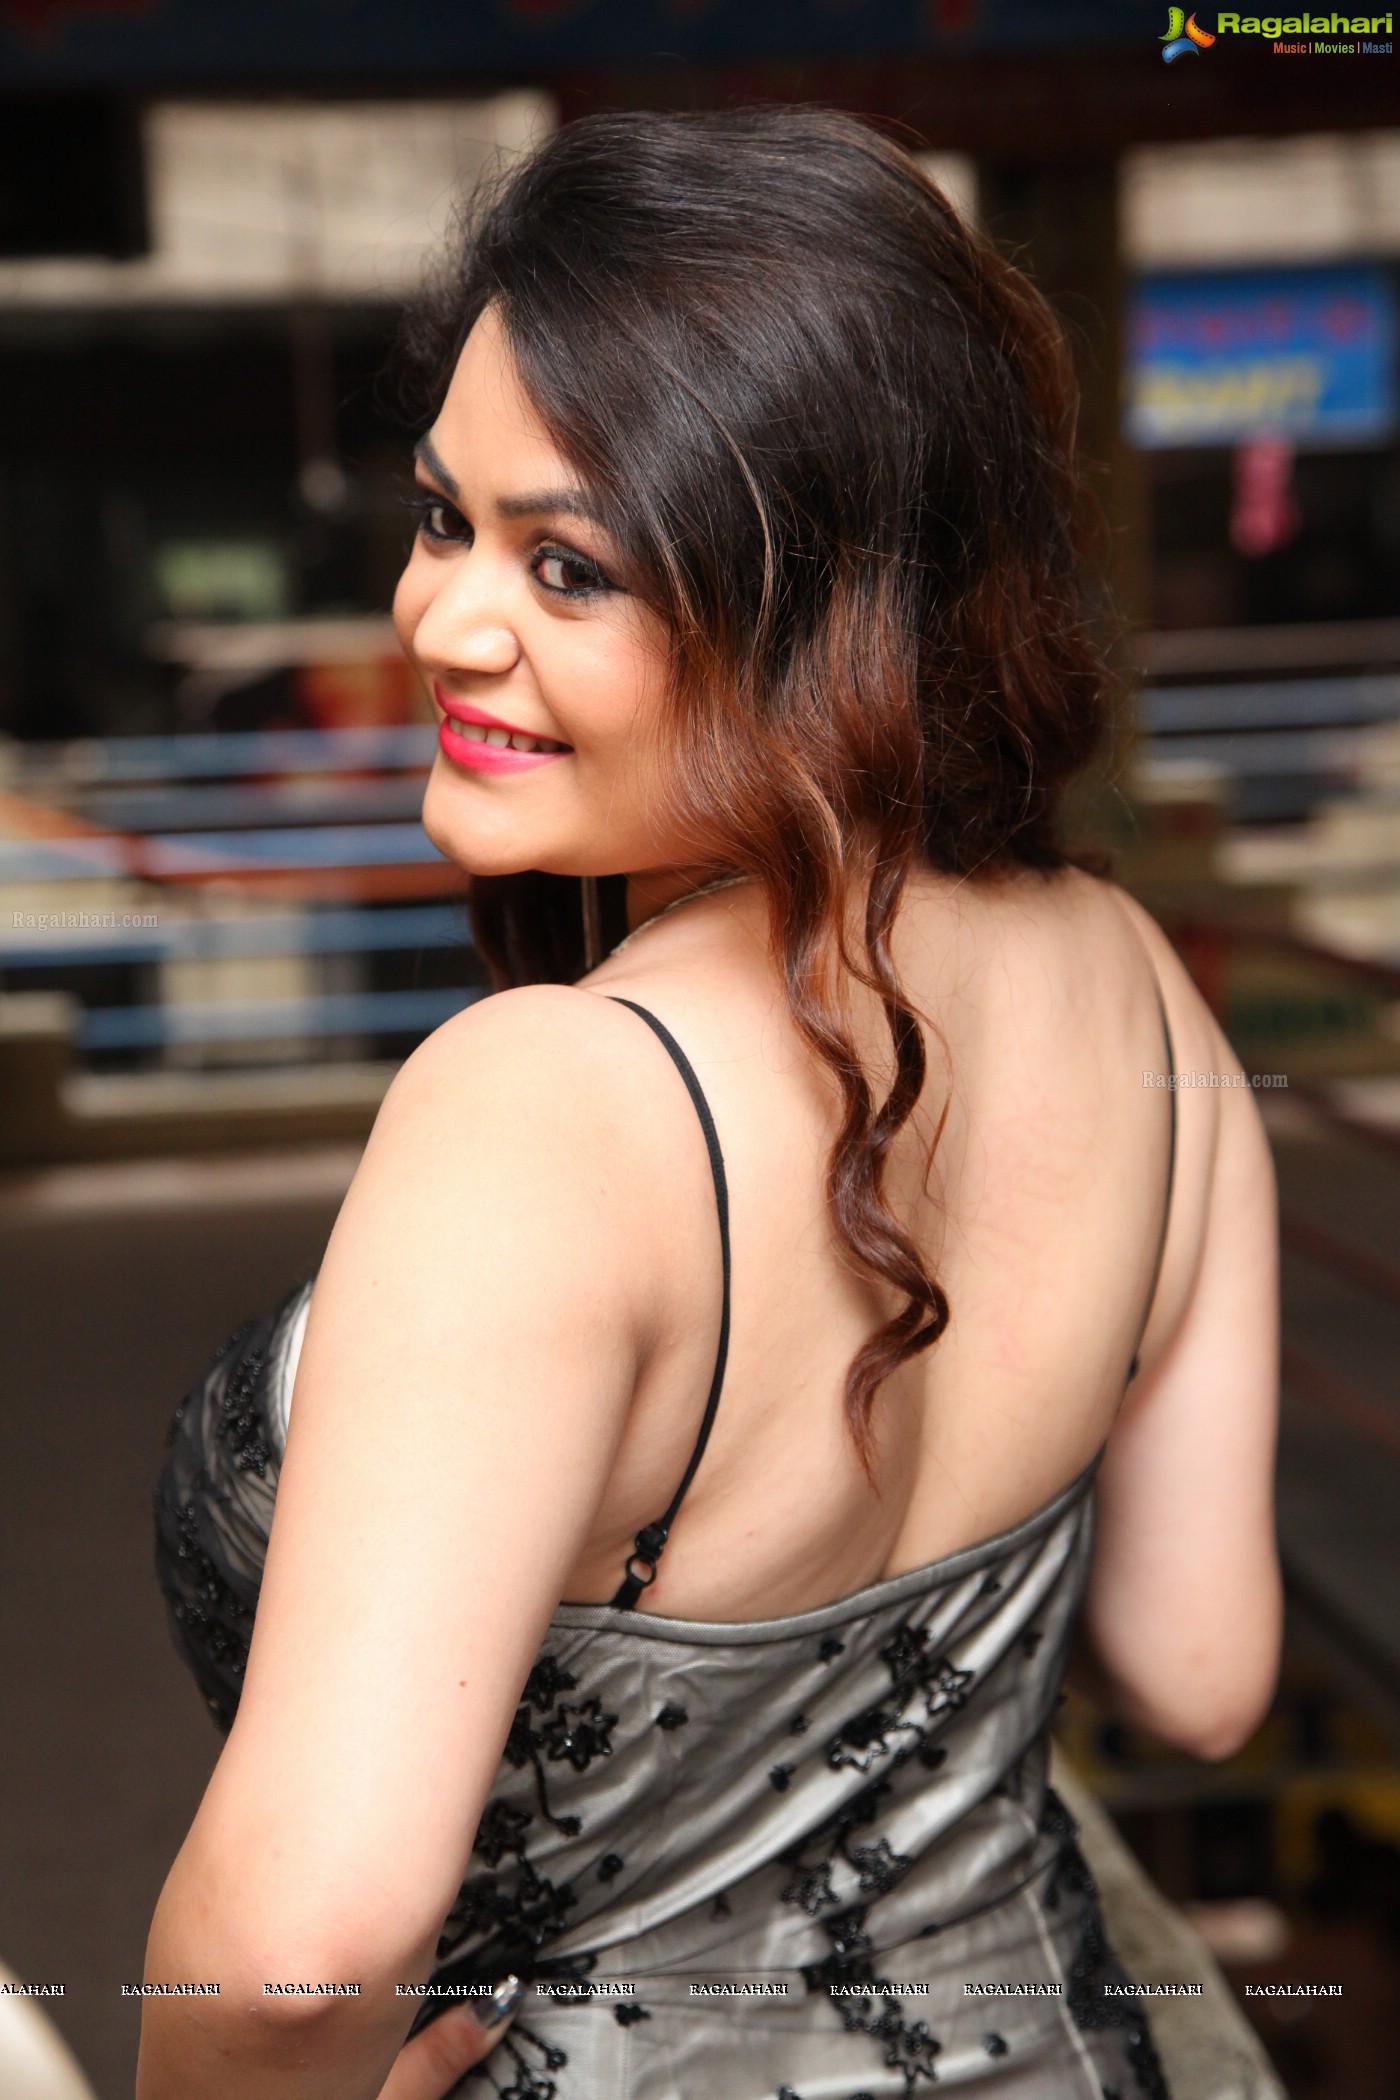 Akshitha Sethi at He's Collections (Posters)